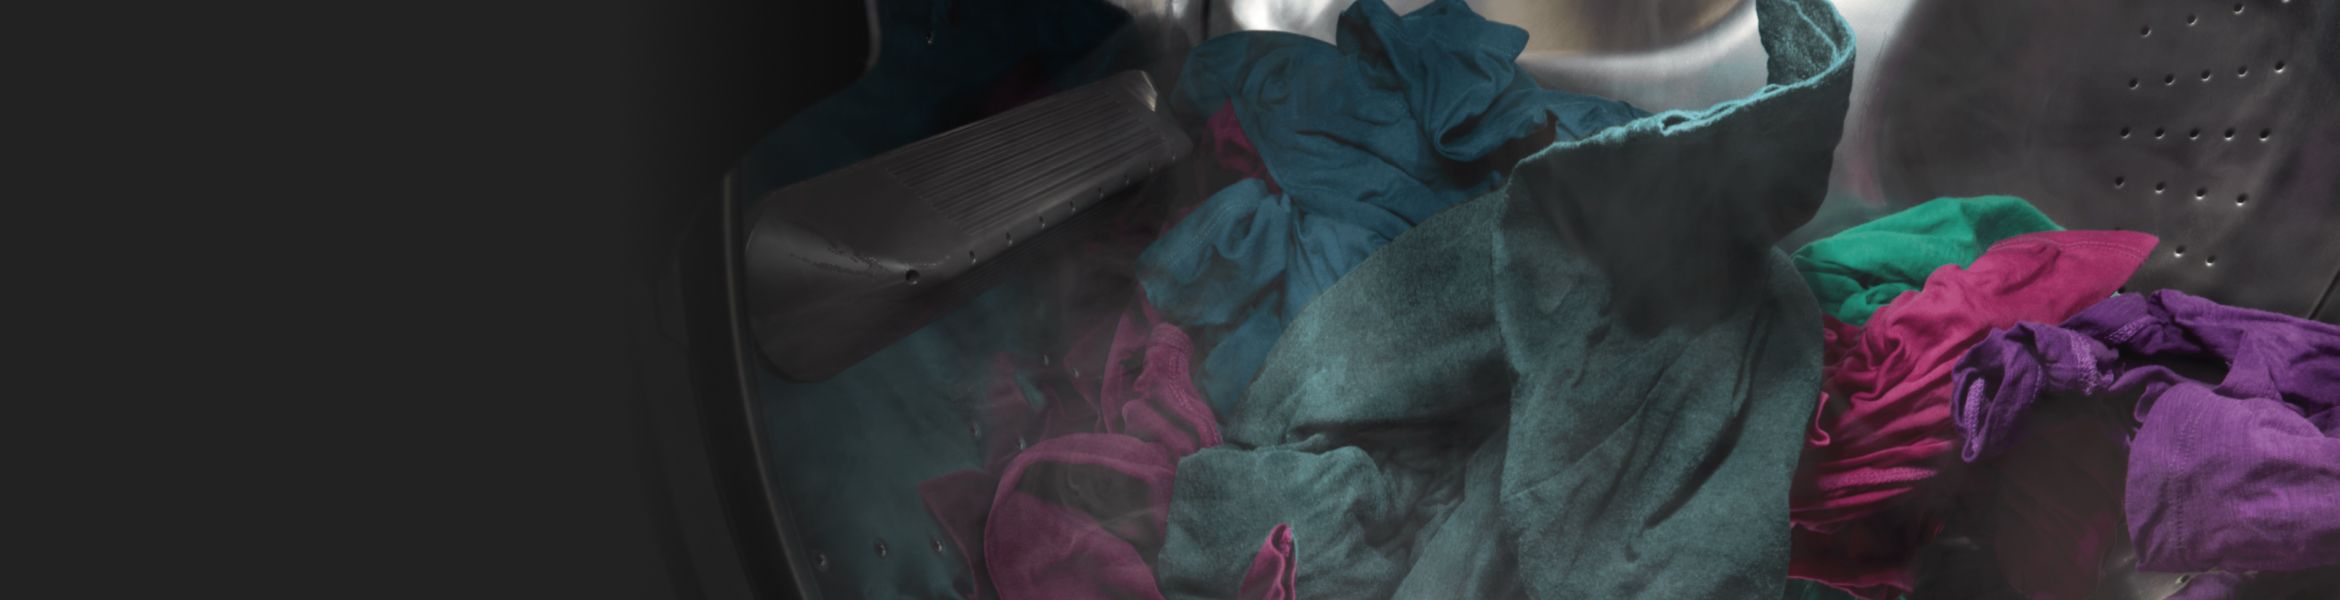 Dark purple and green clothes spinning in a washer